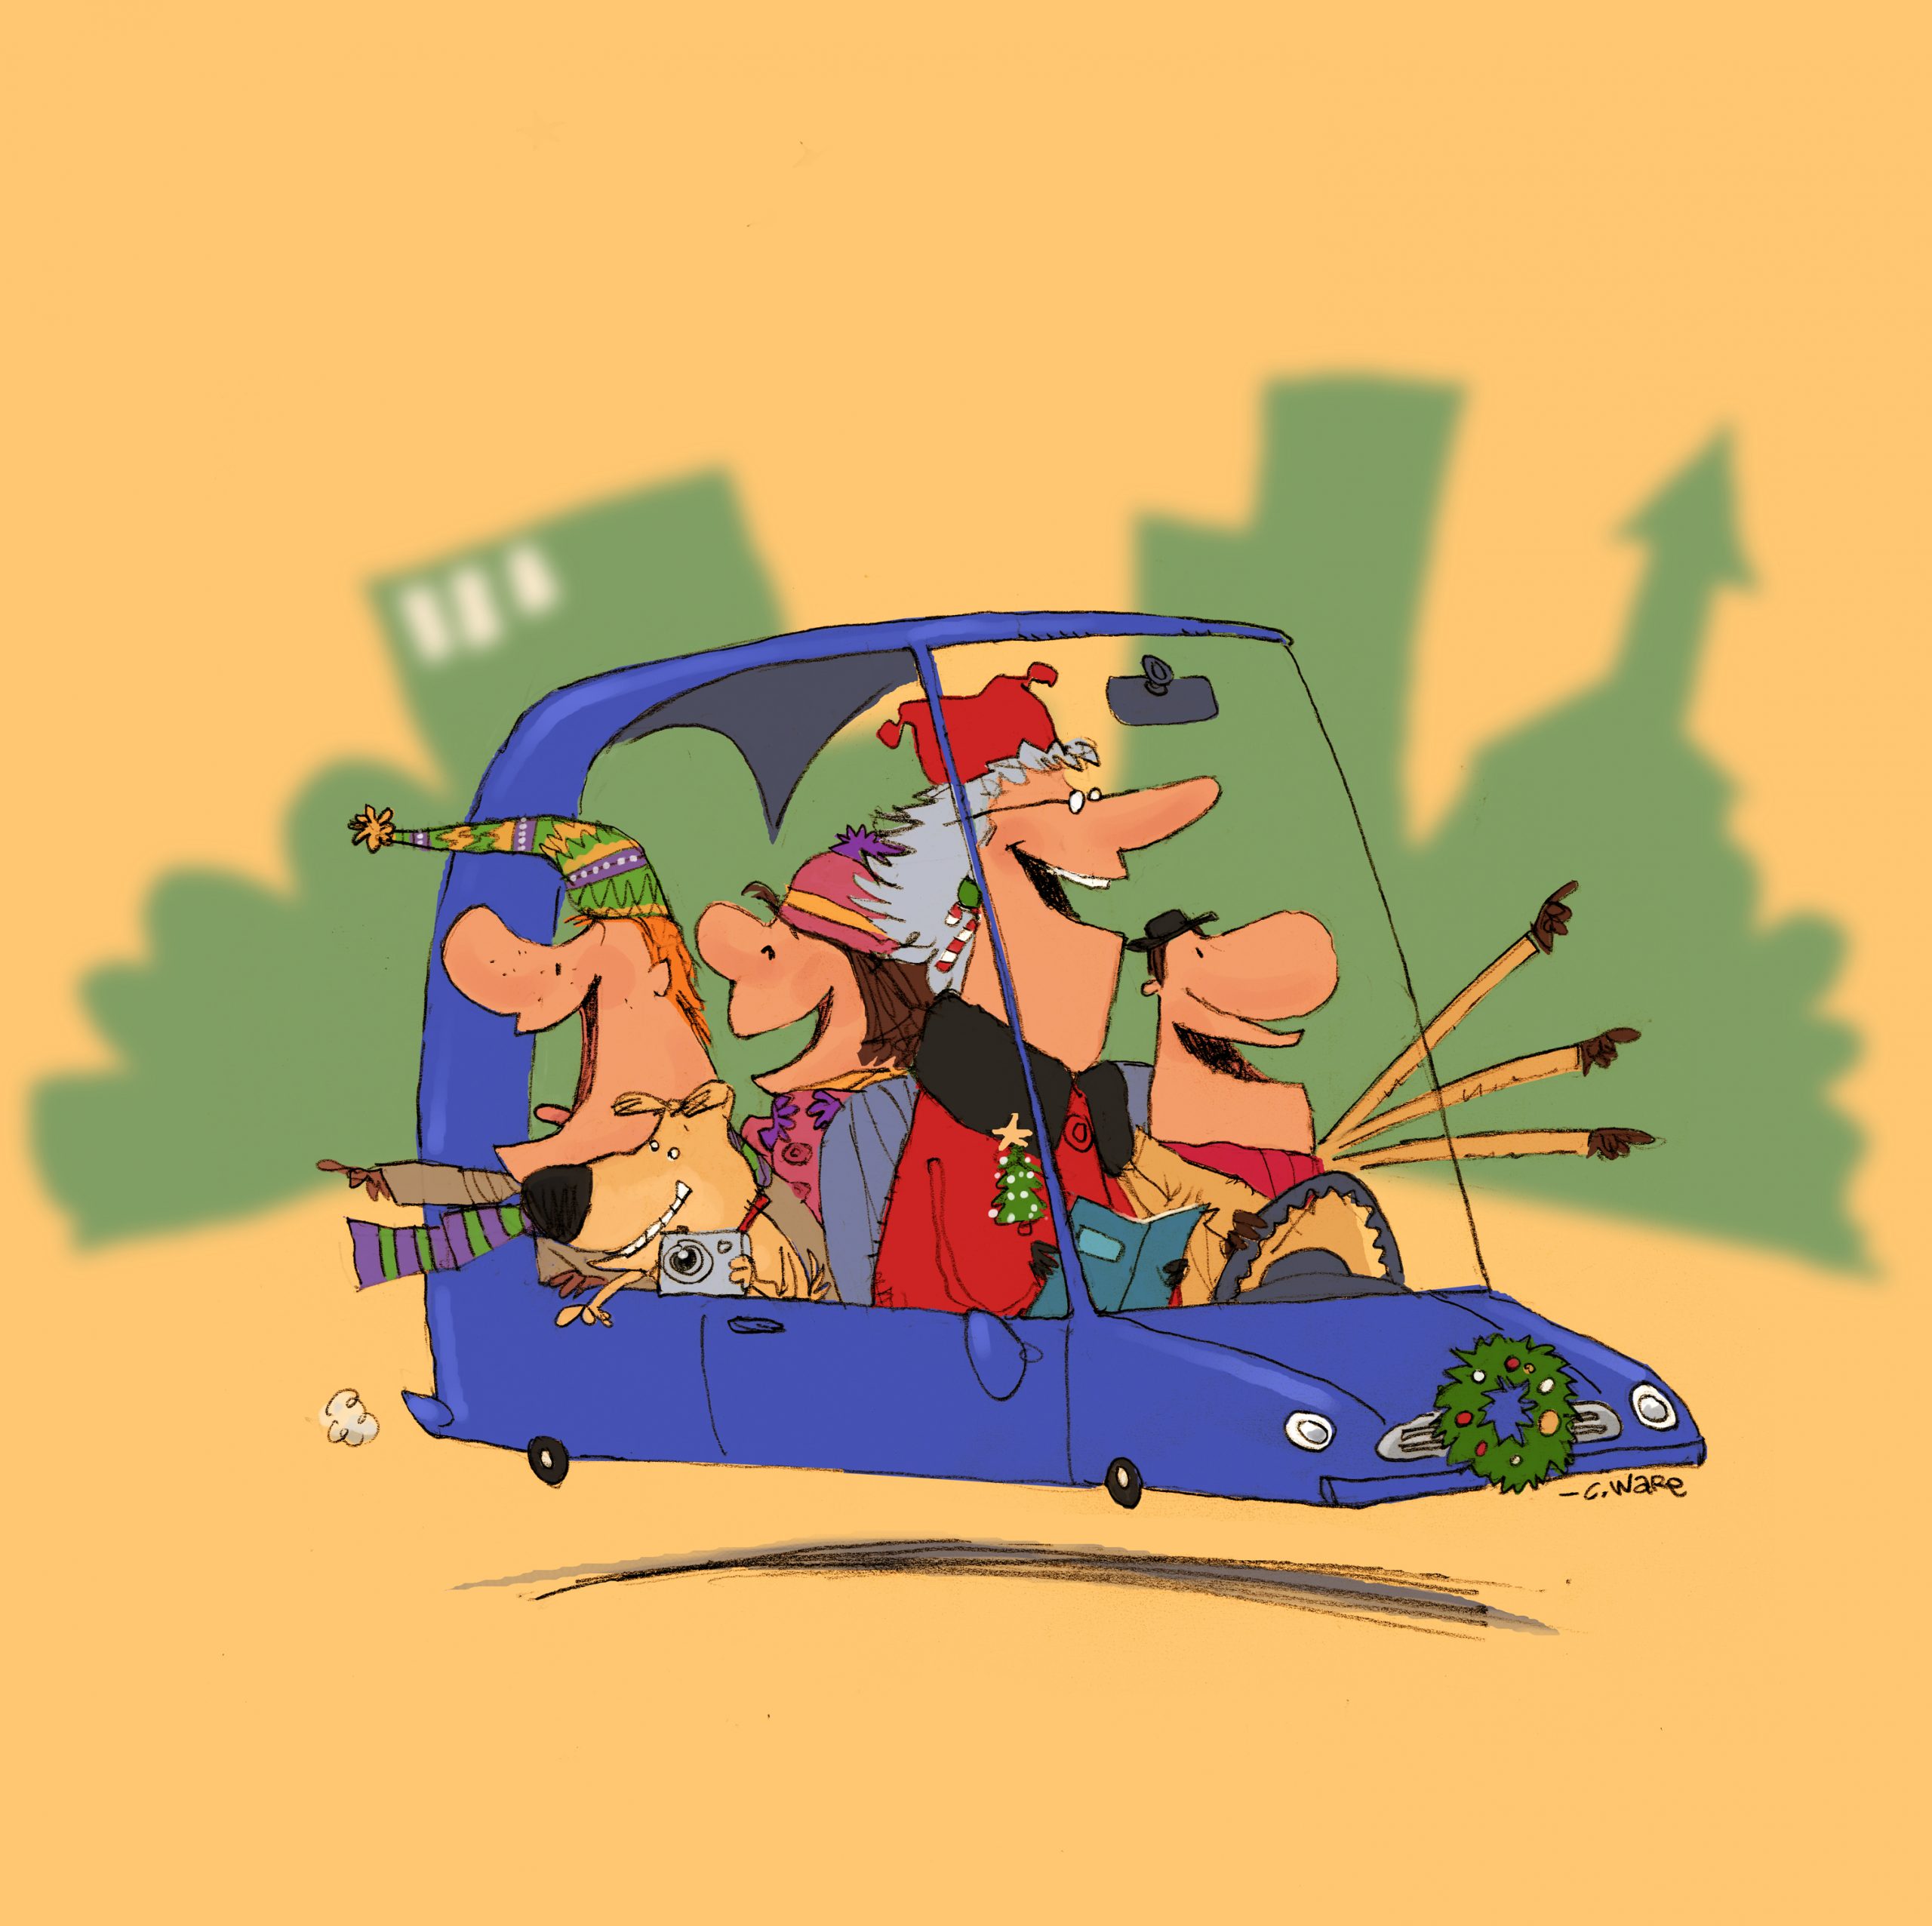 Cartoon of four people and a dog inside a blue car with tiny wheels, which looks like its floating. Two people are pointing and they are all smiling. The dog holds a camera.